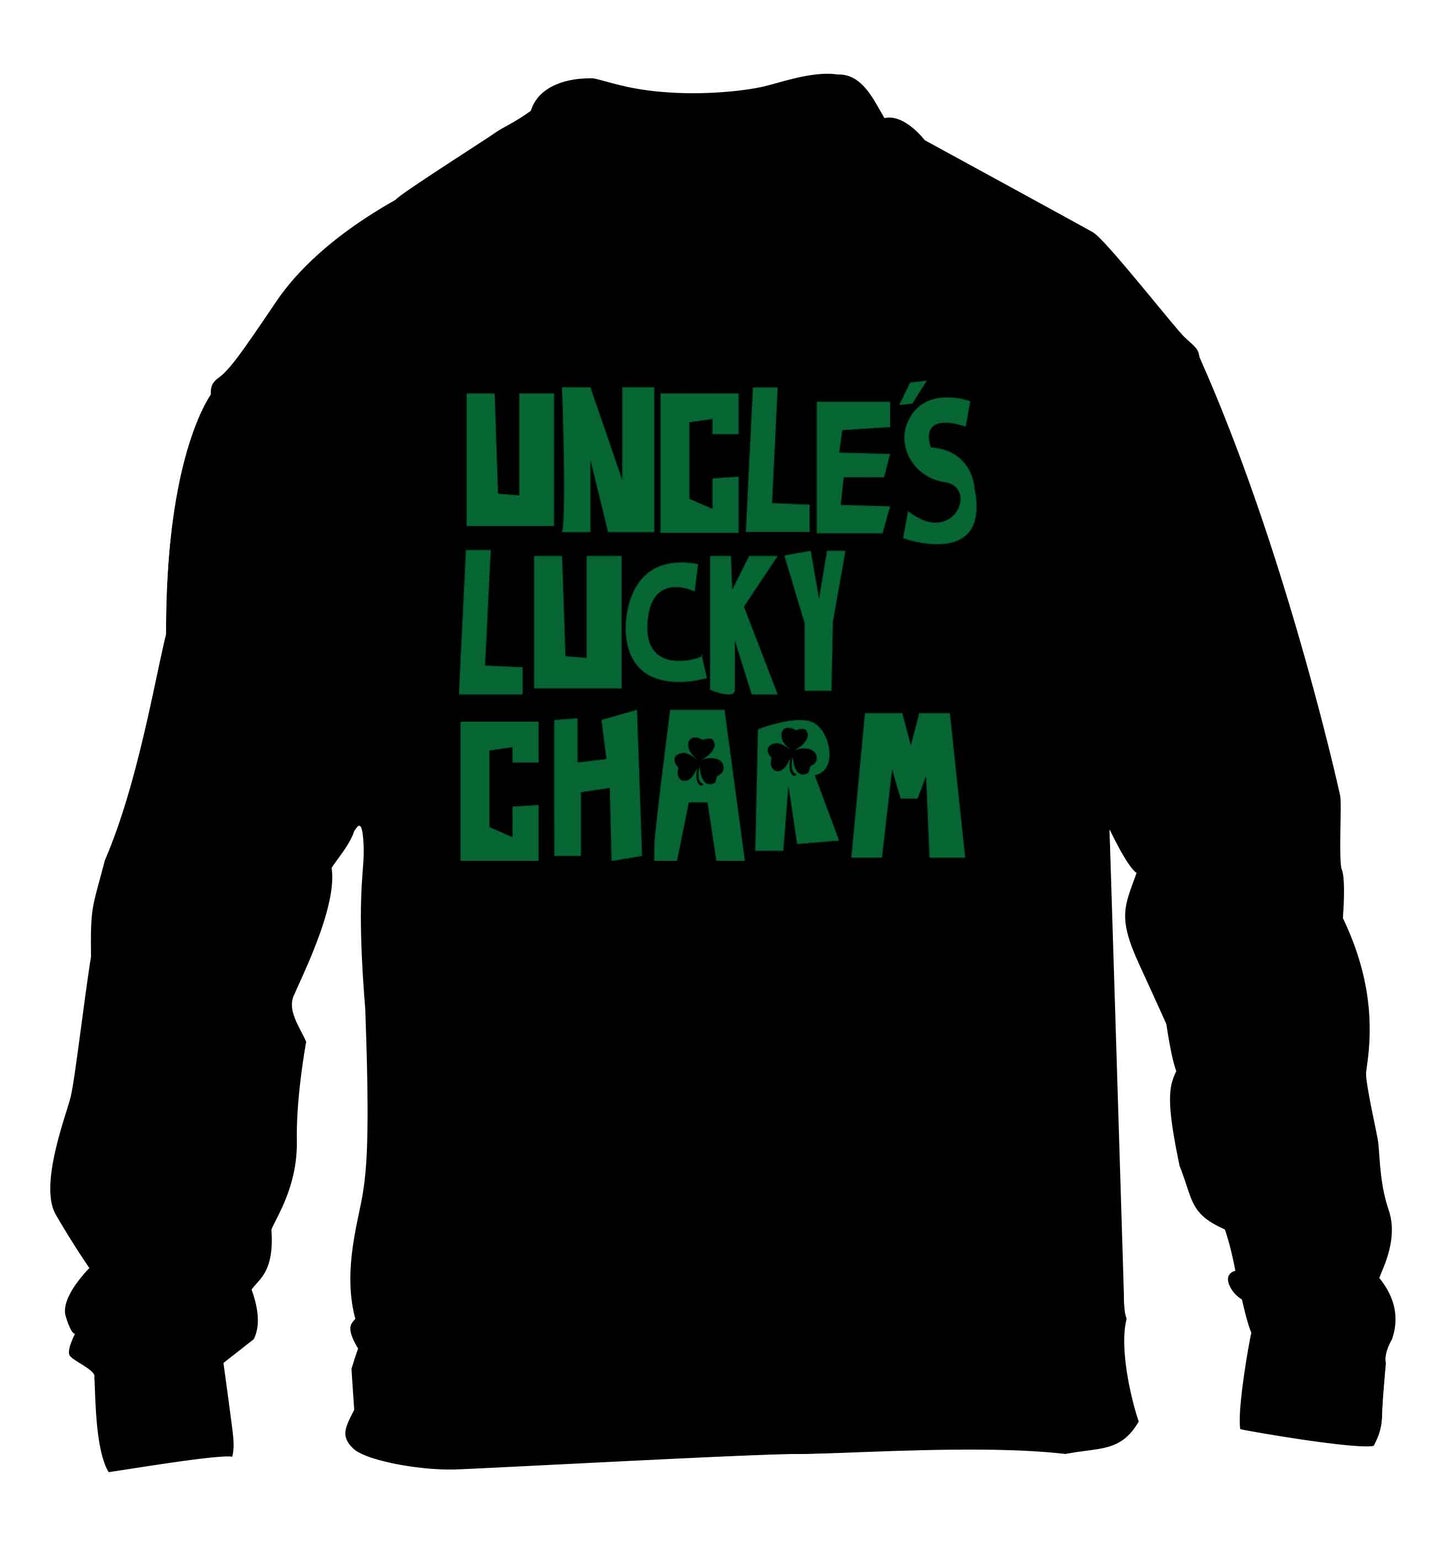 Uncles lucky charm children's black sweater 12-13 Years